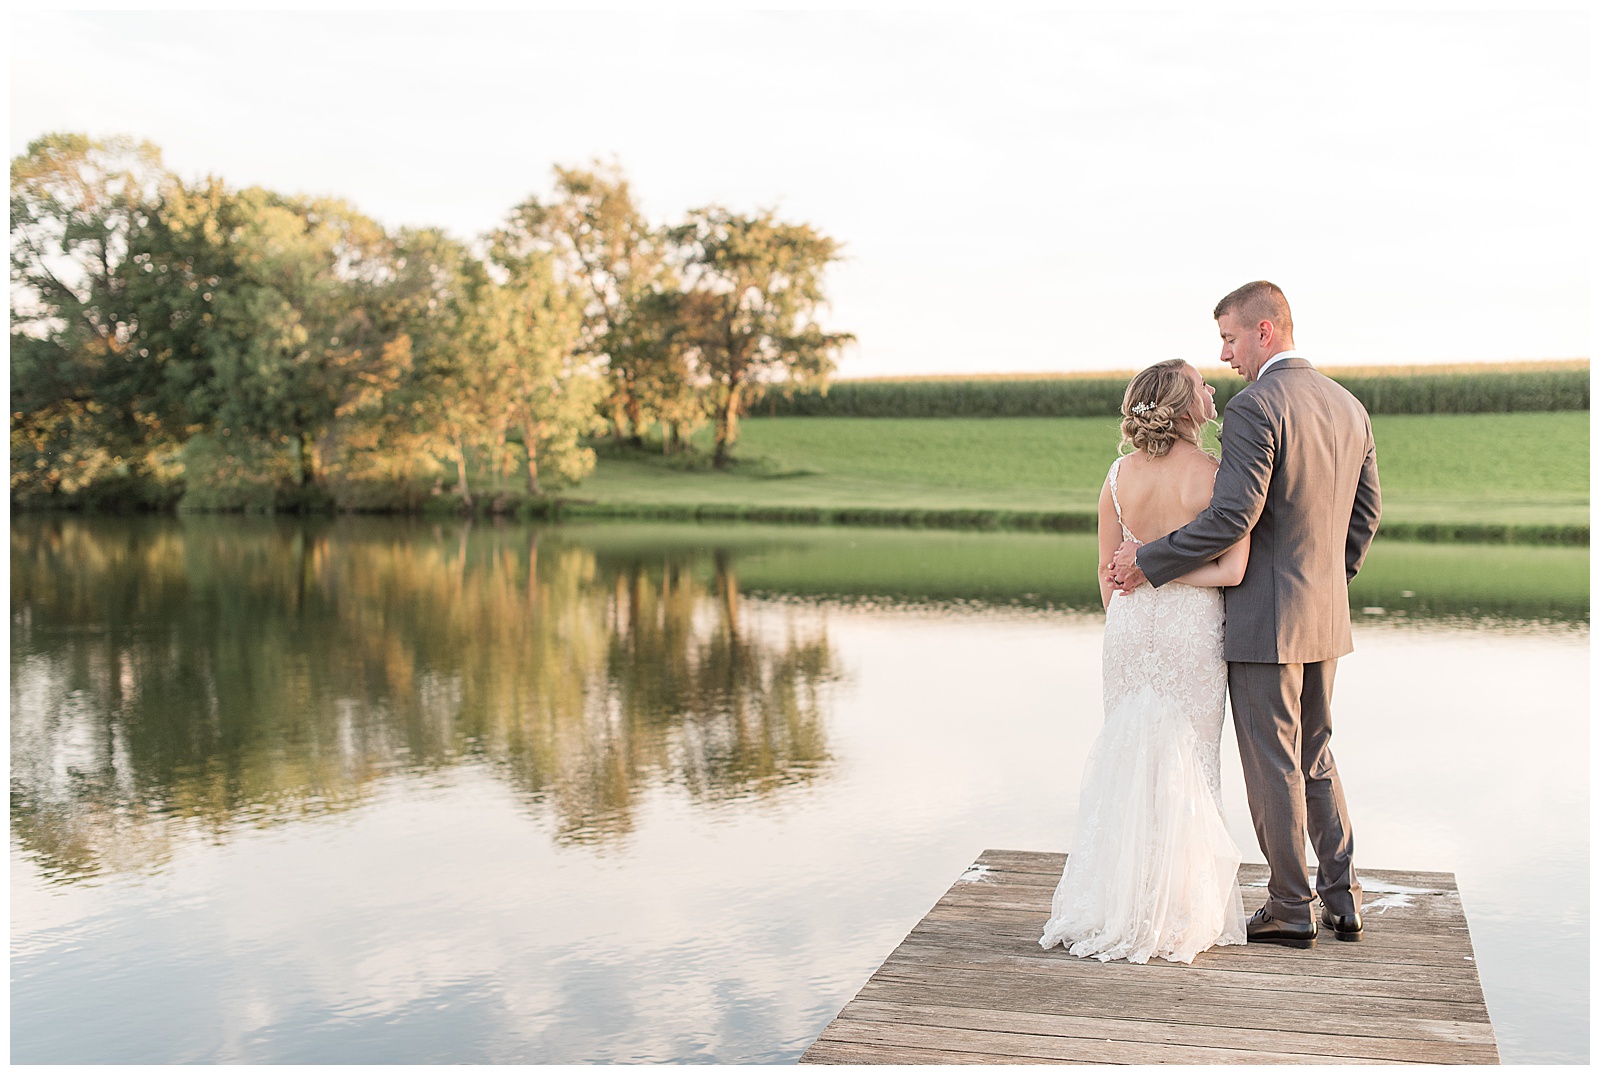 the couple is standing at the end of the dock with the bride on the left and the groom on the right with their backs to the camera and arms around one another looking at each other with the pond and tree reflections in the background on a sunny day at Lakefield Weddings in Manheim, PA